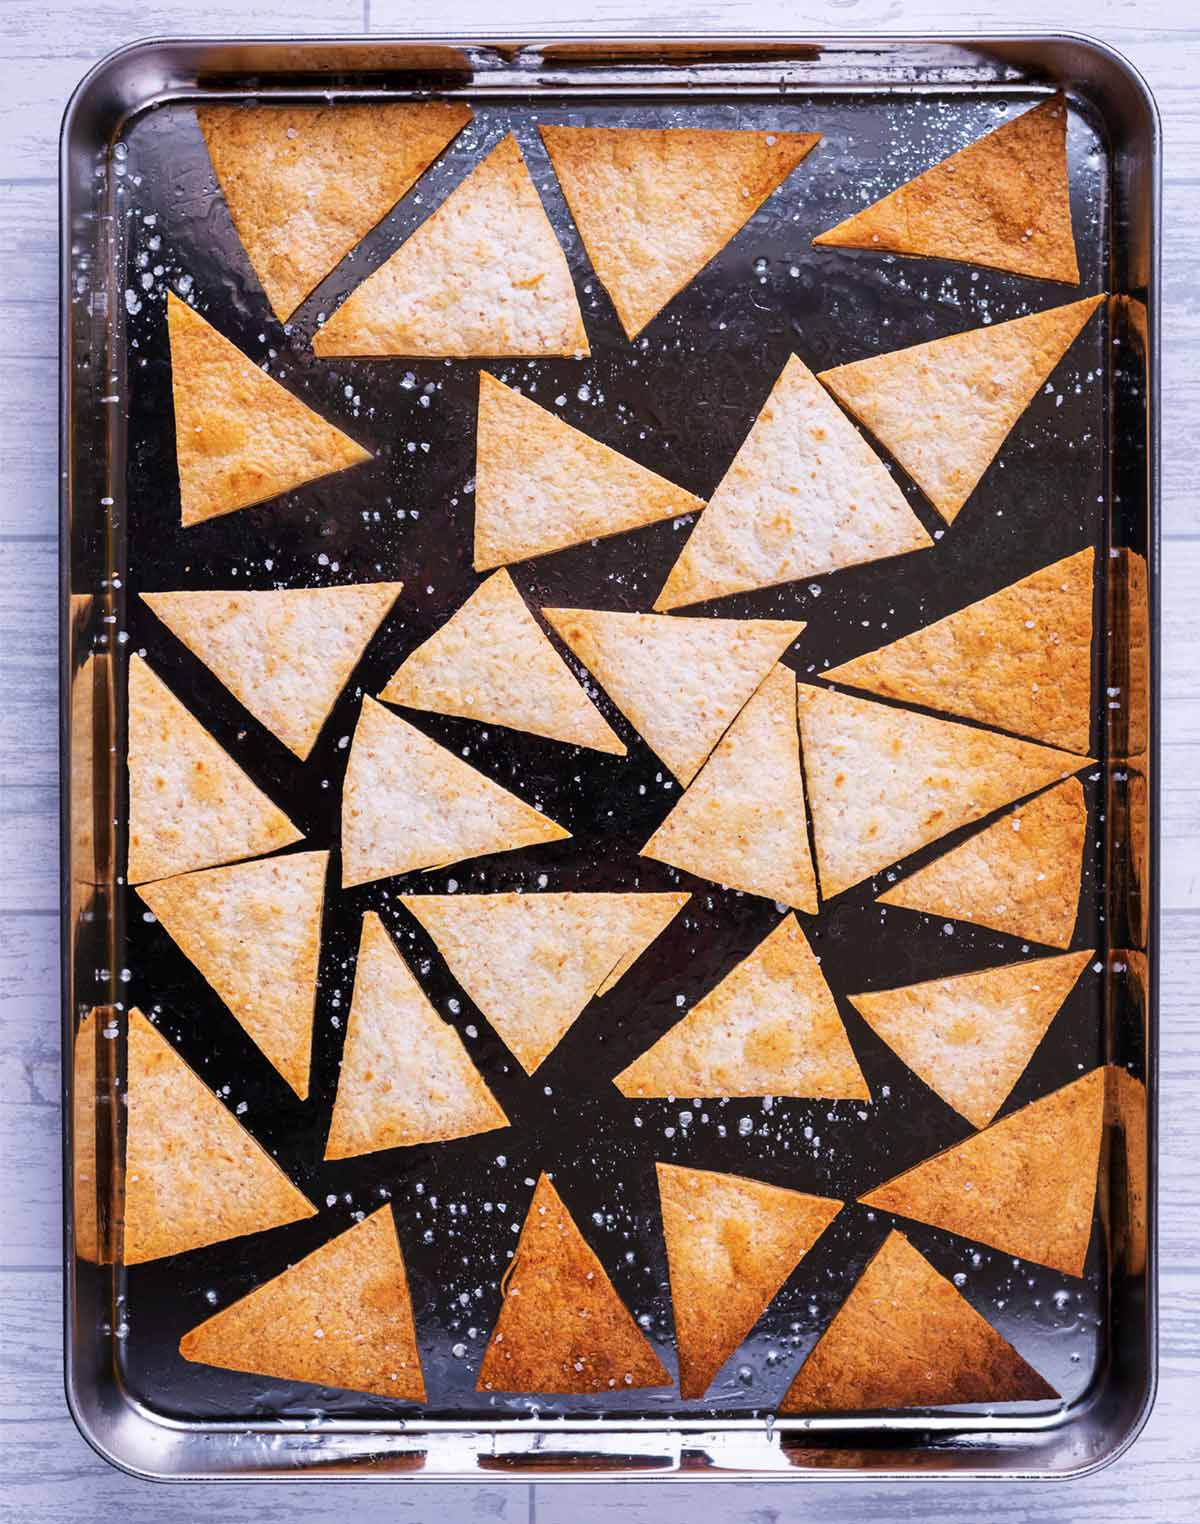 Baked tortilla chips on a baking tray.